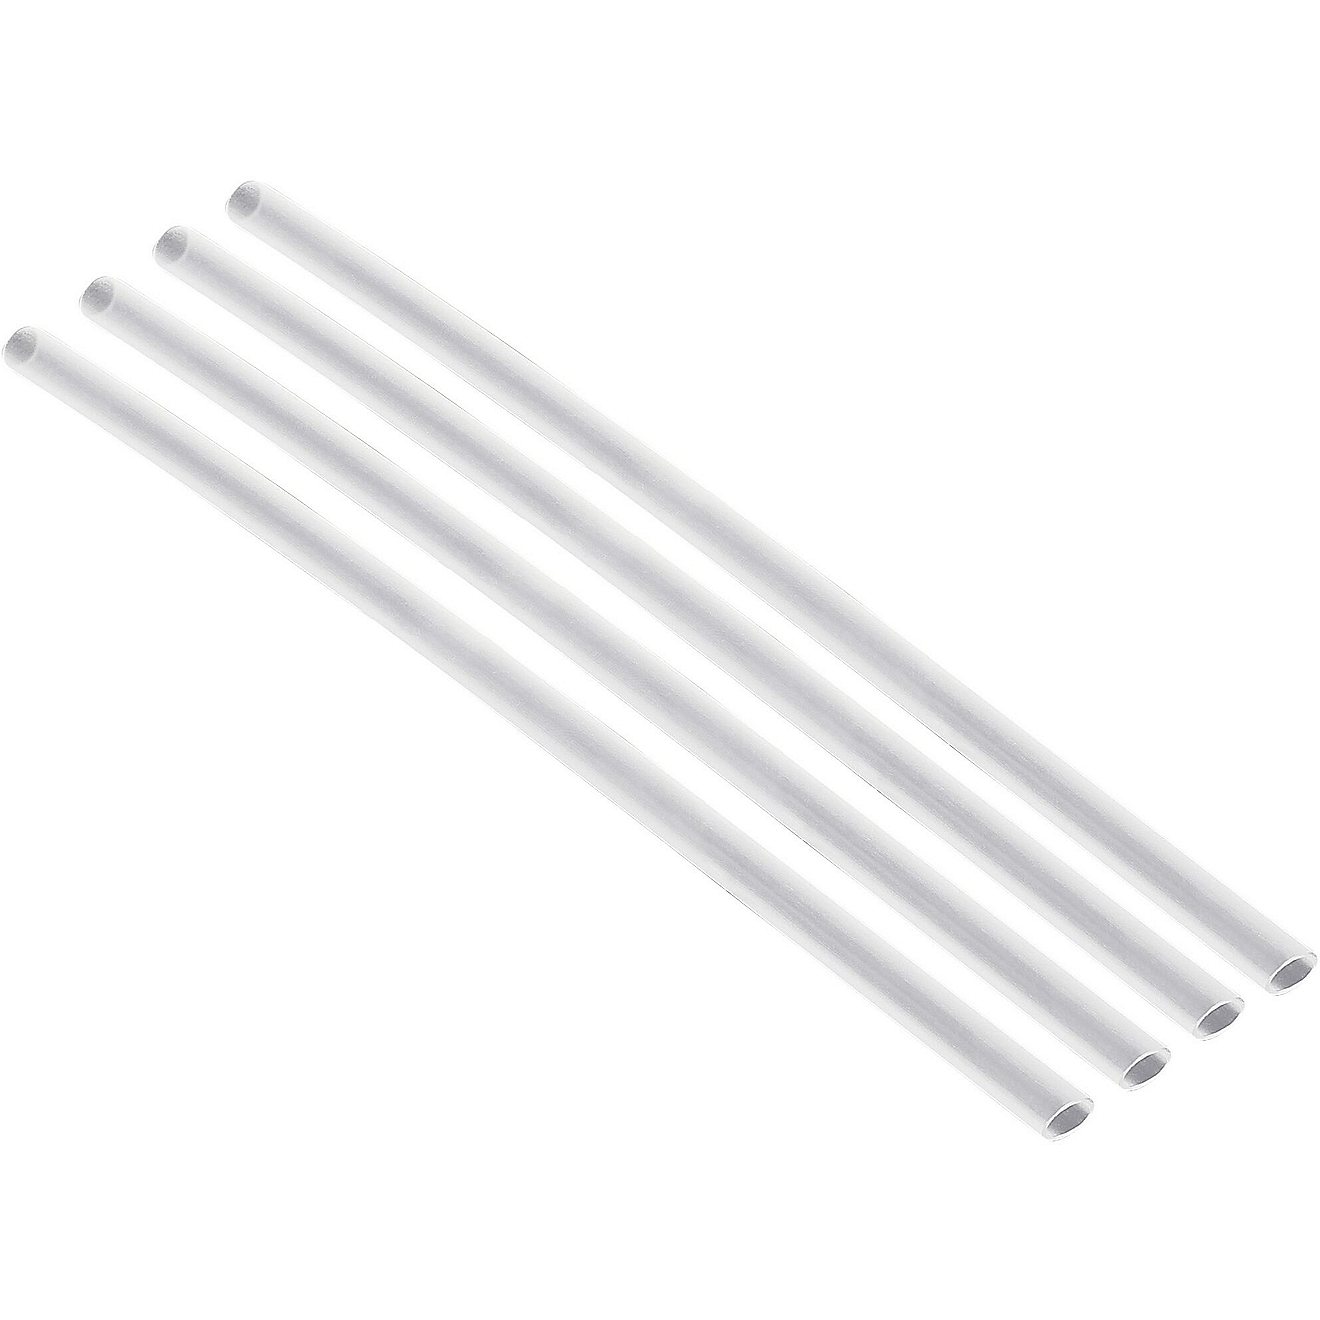 Stanley 40 oz Adventure Quencher Replacement Straws 4-Pack